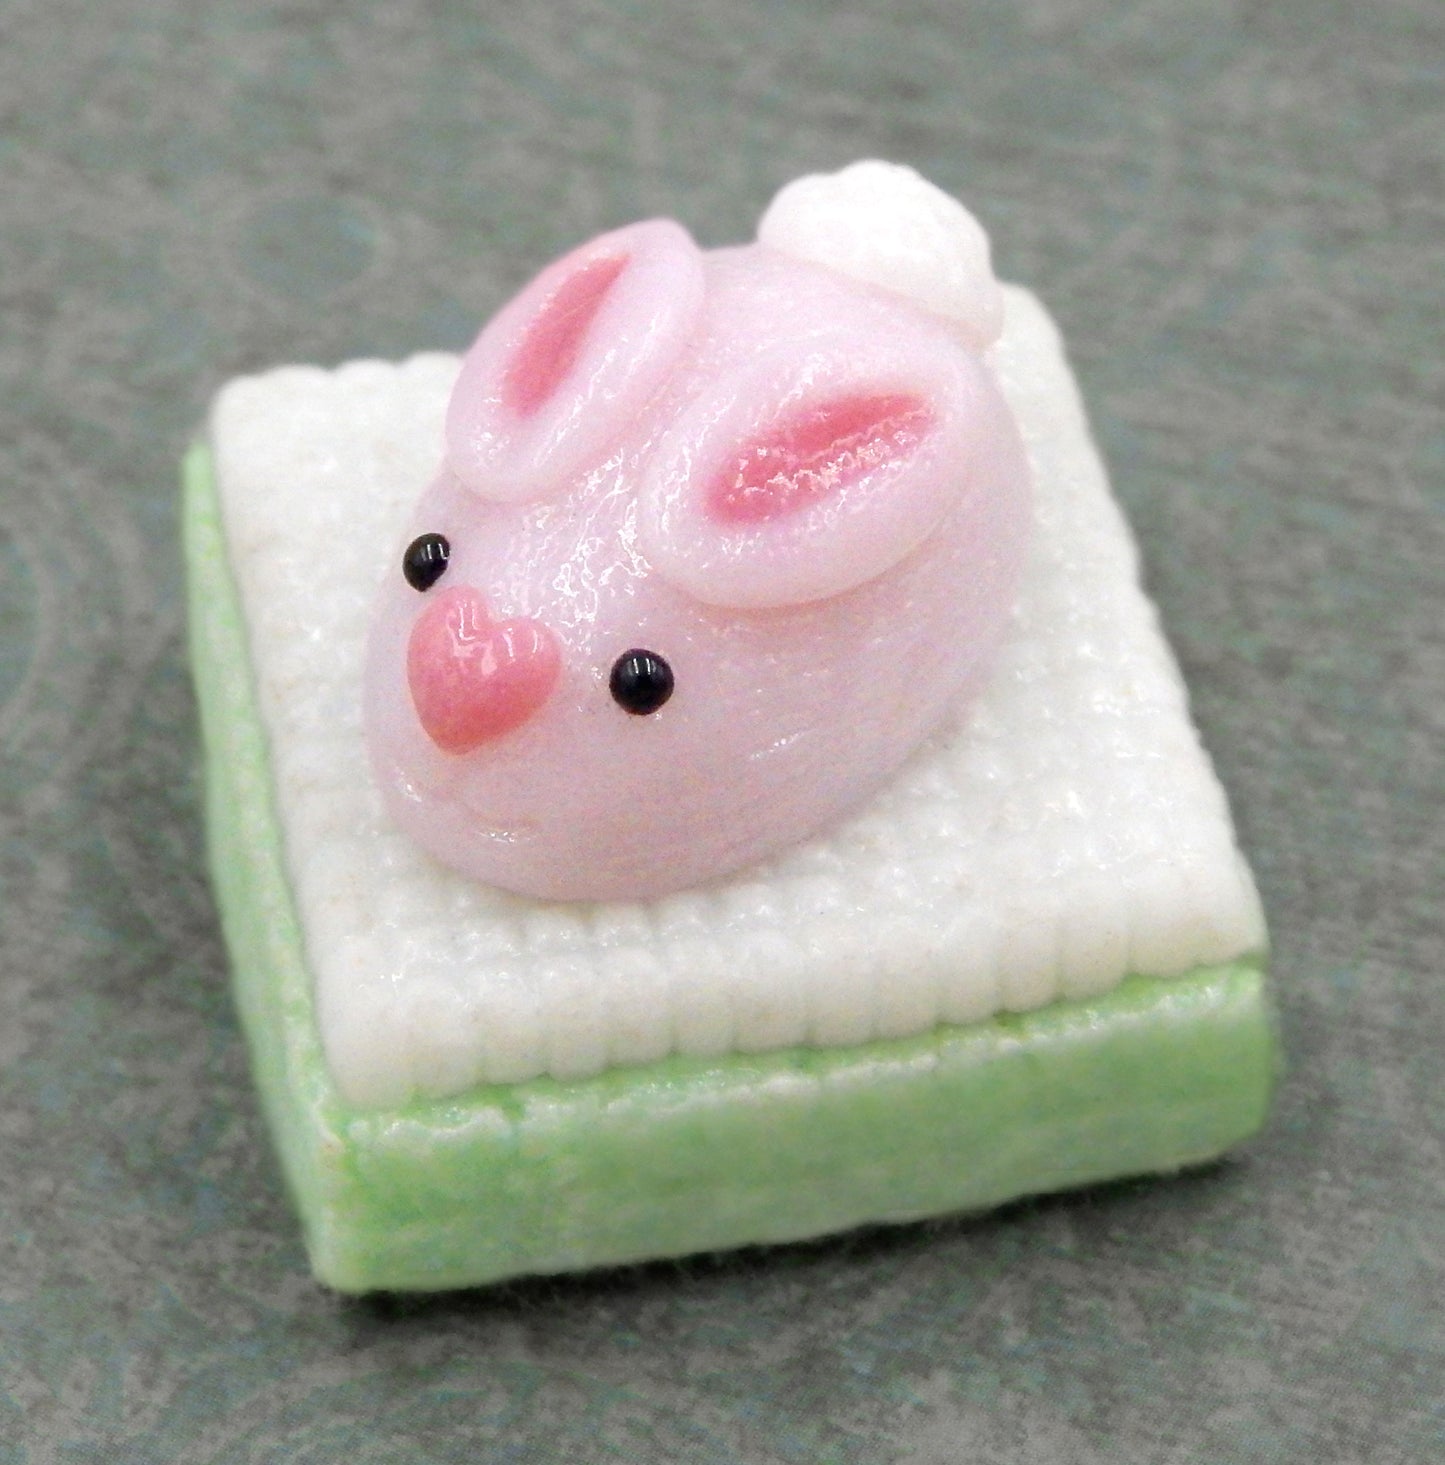 Bunny Rabbit on Petit Four (83-100+) - Assorted Colors